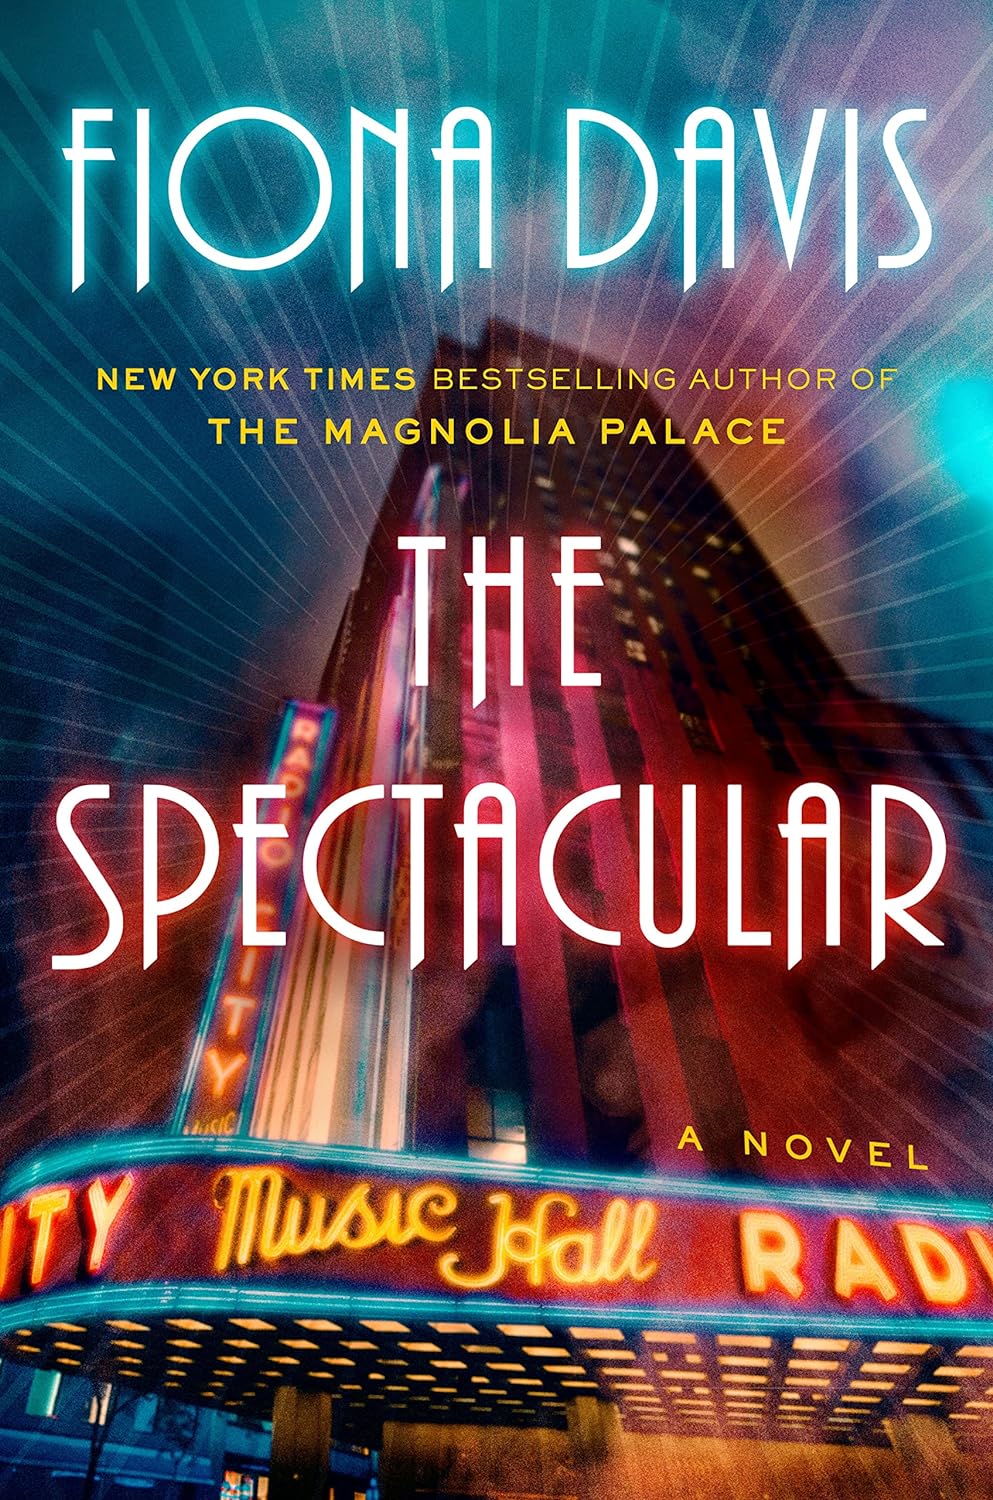 Image for "The Spectacular: A Novel"